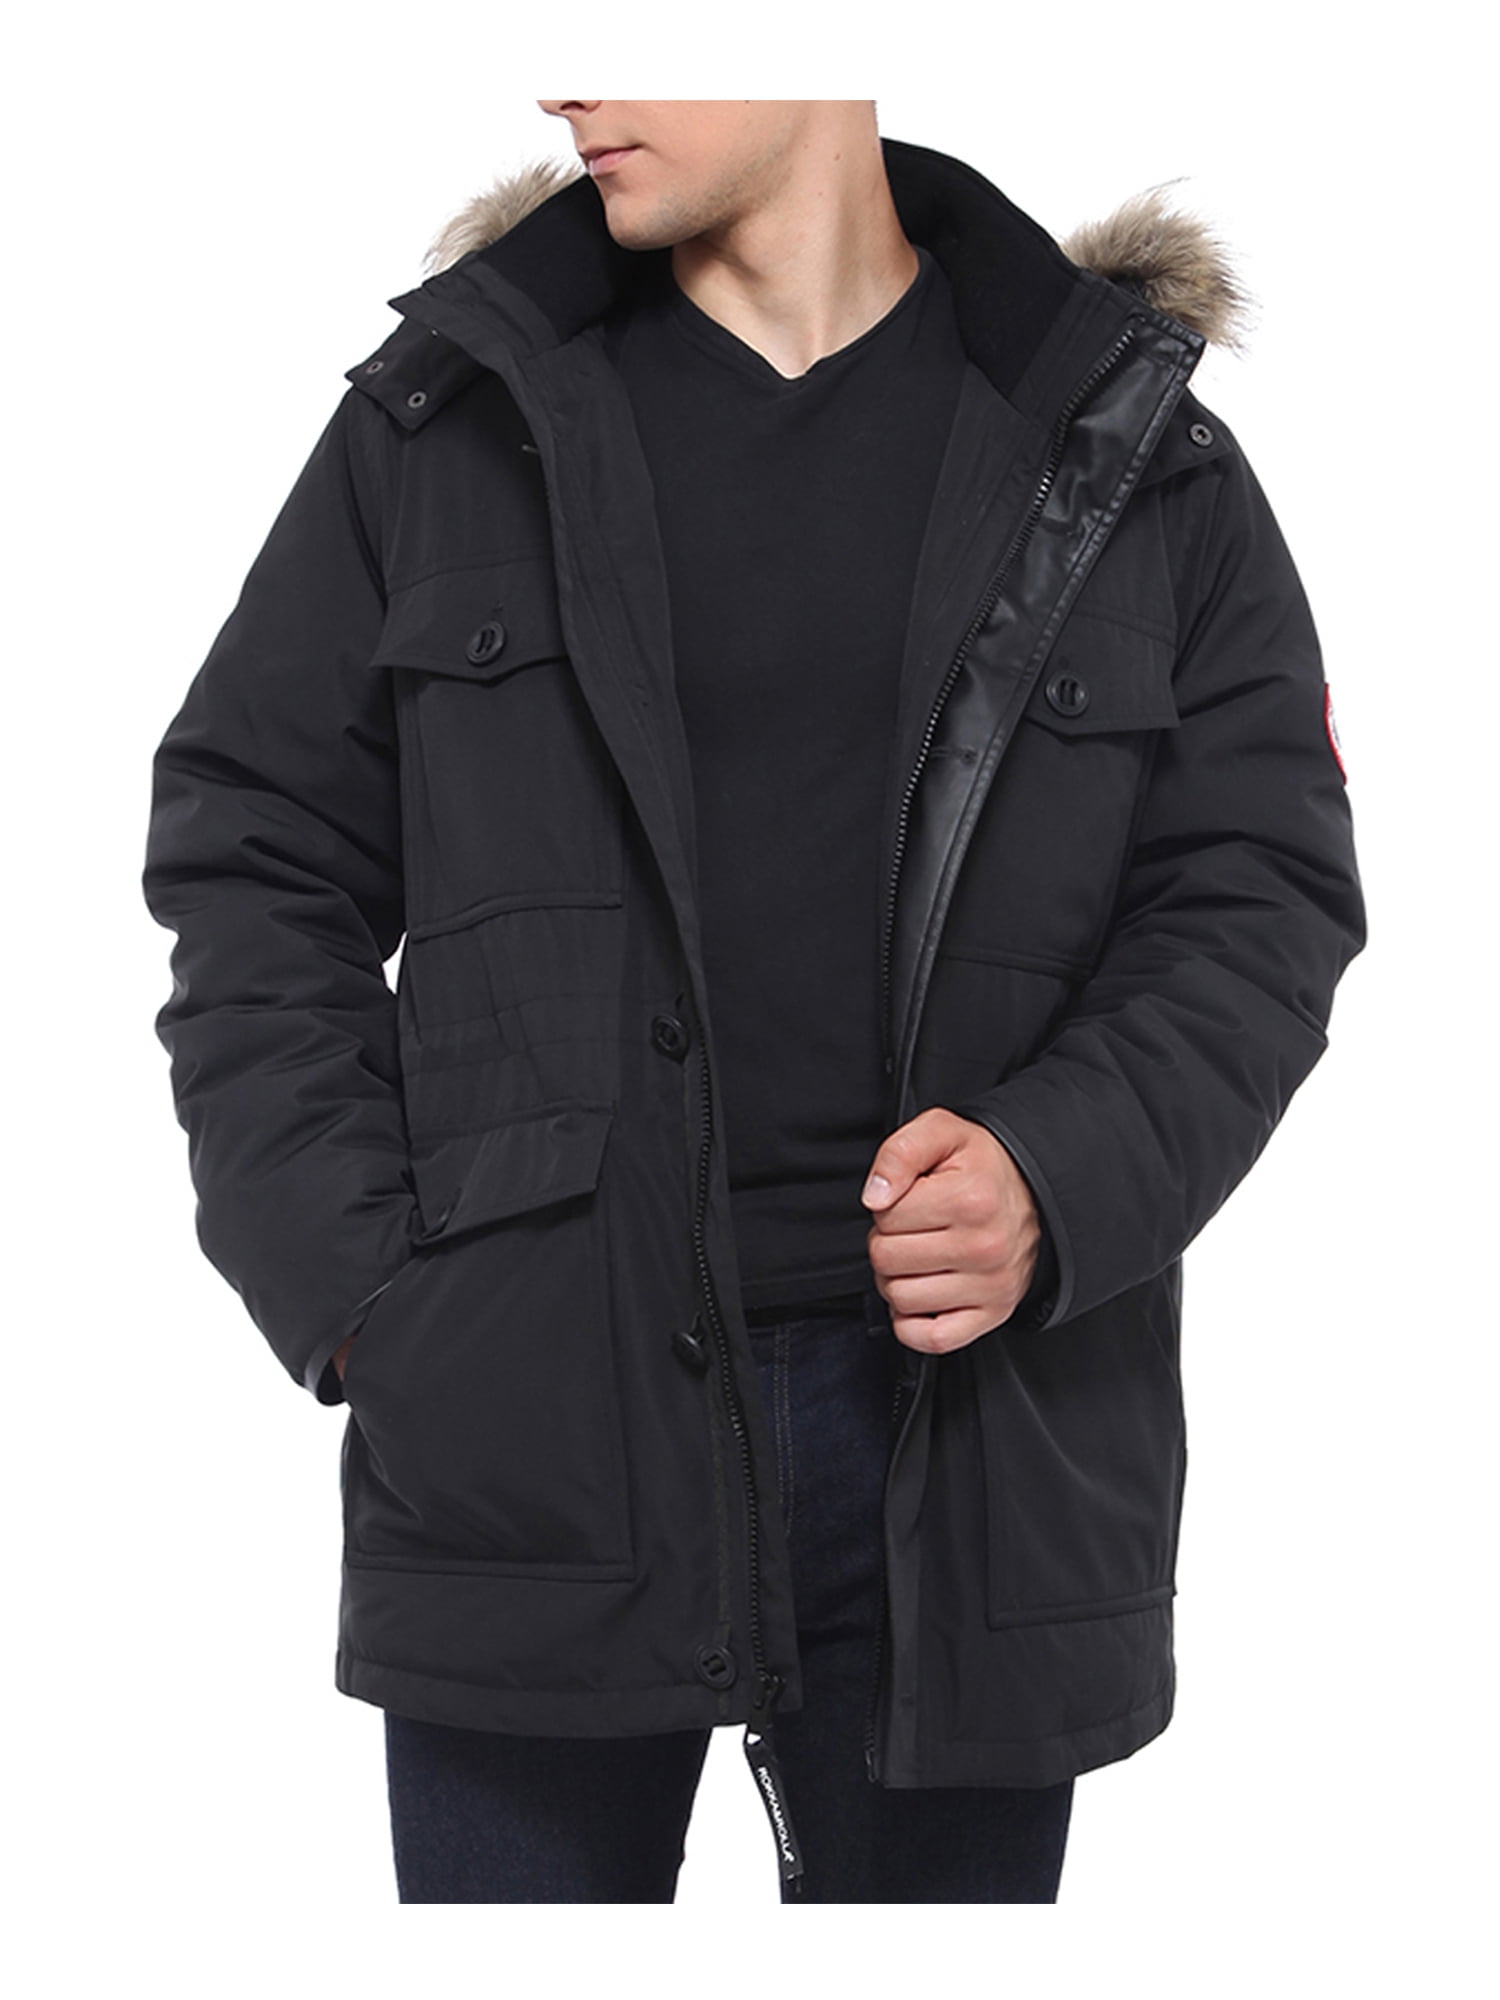 Gihuo Mens Winter Business Quilted Hooded Parka Jacket Anorak